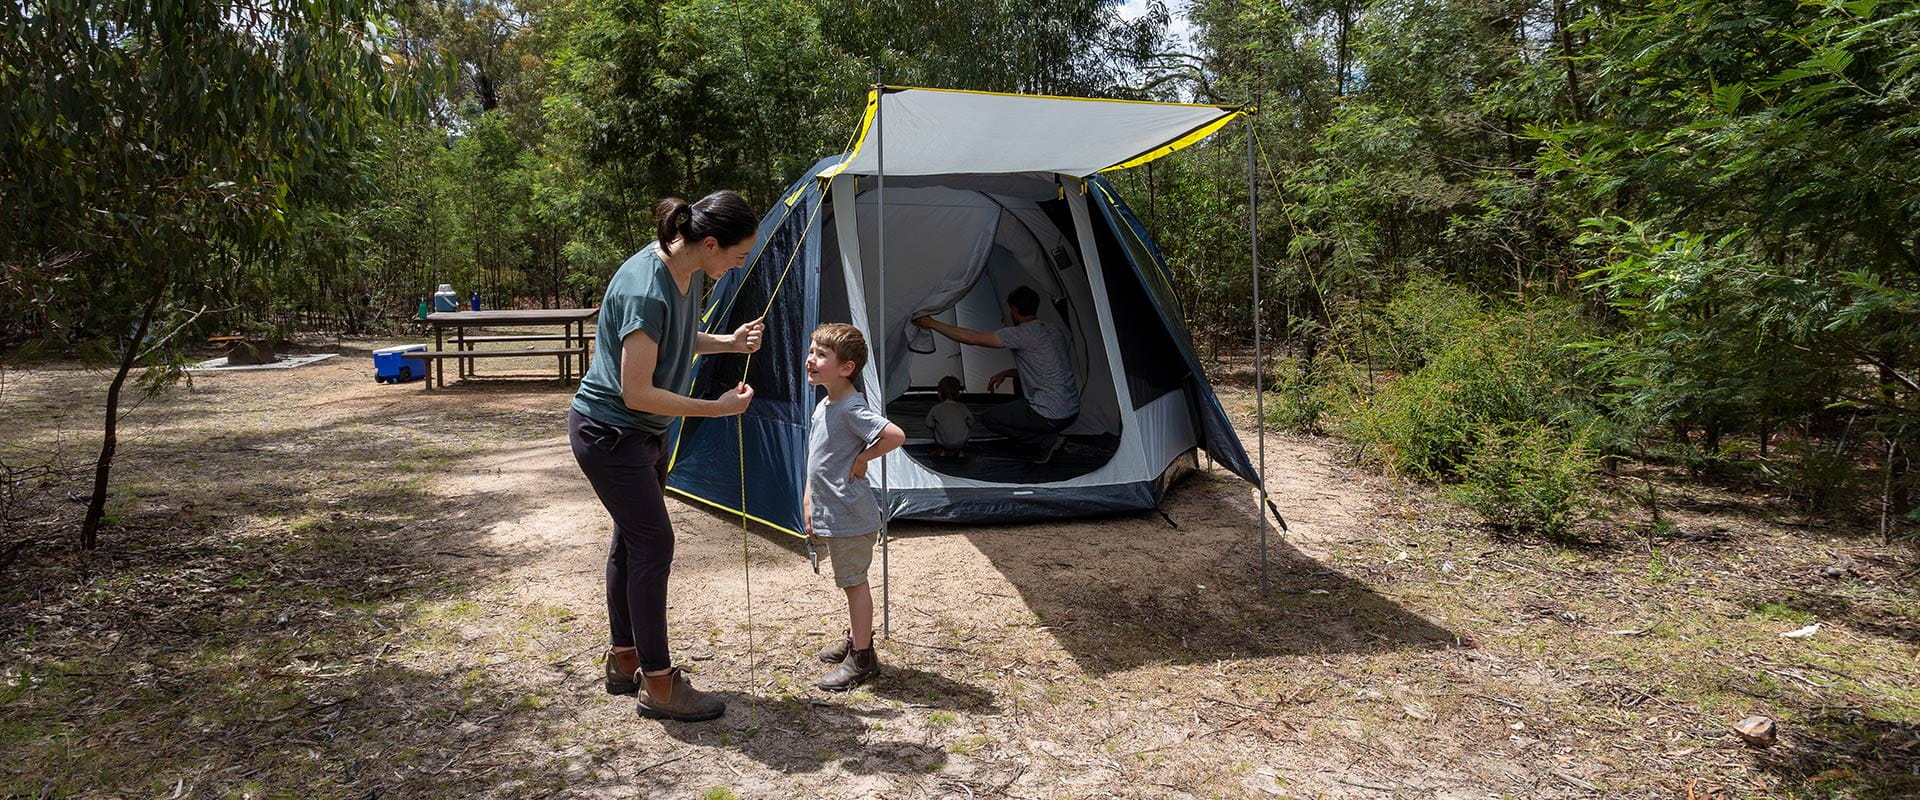 A family set up camp surrounded by bushland